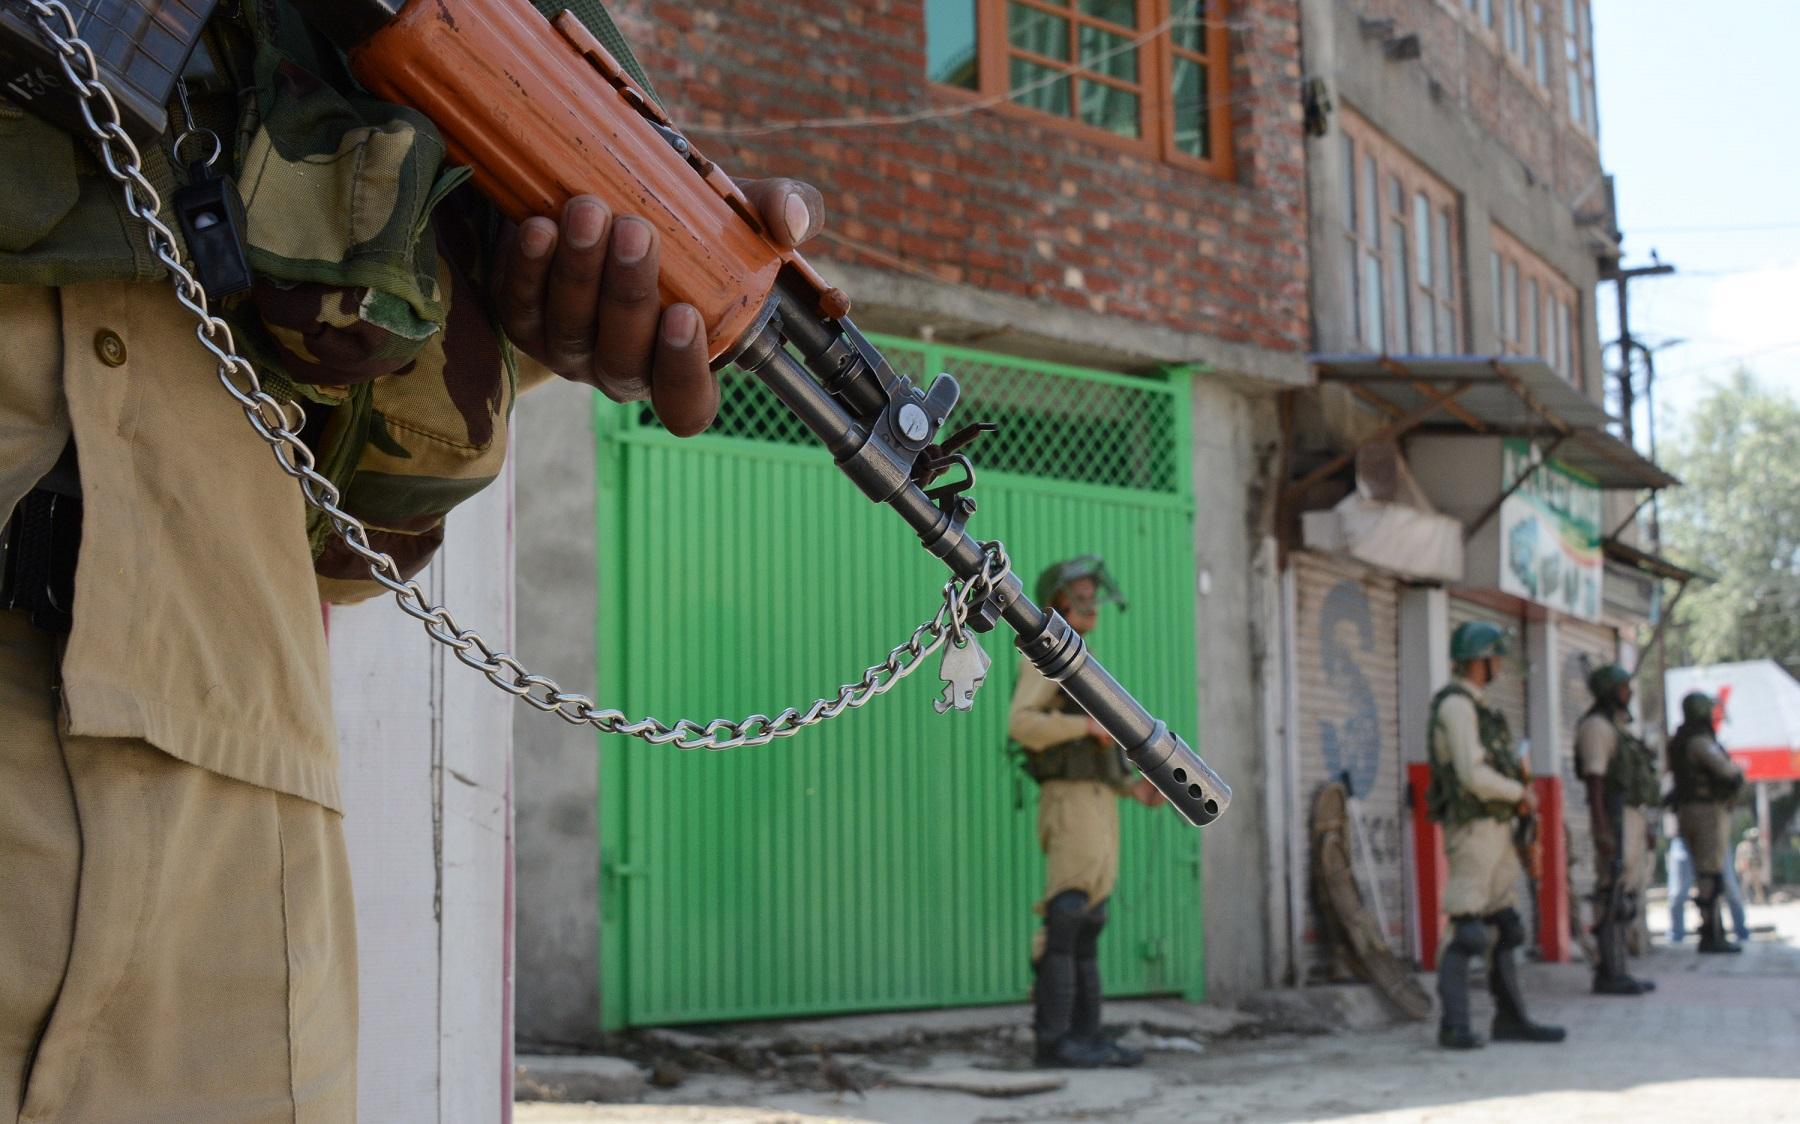 Soldiers stand guard in Srinigar, Kashmir, as India’s crackdown continues